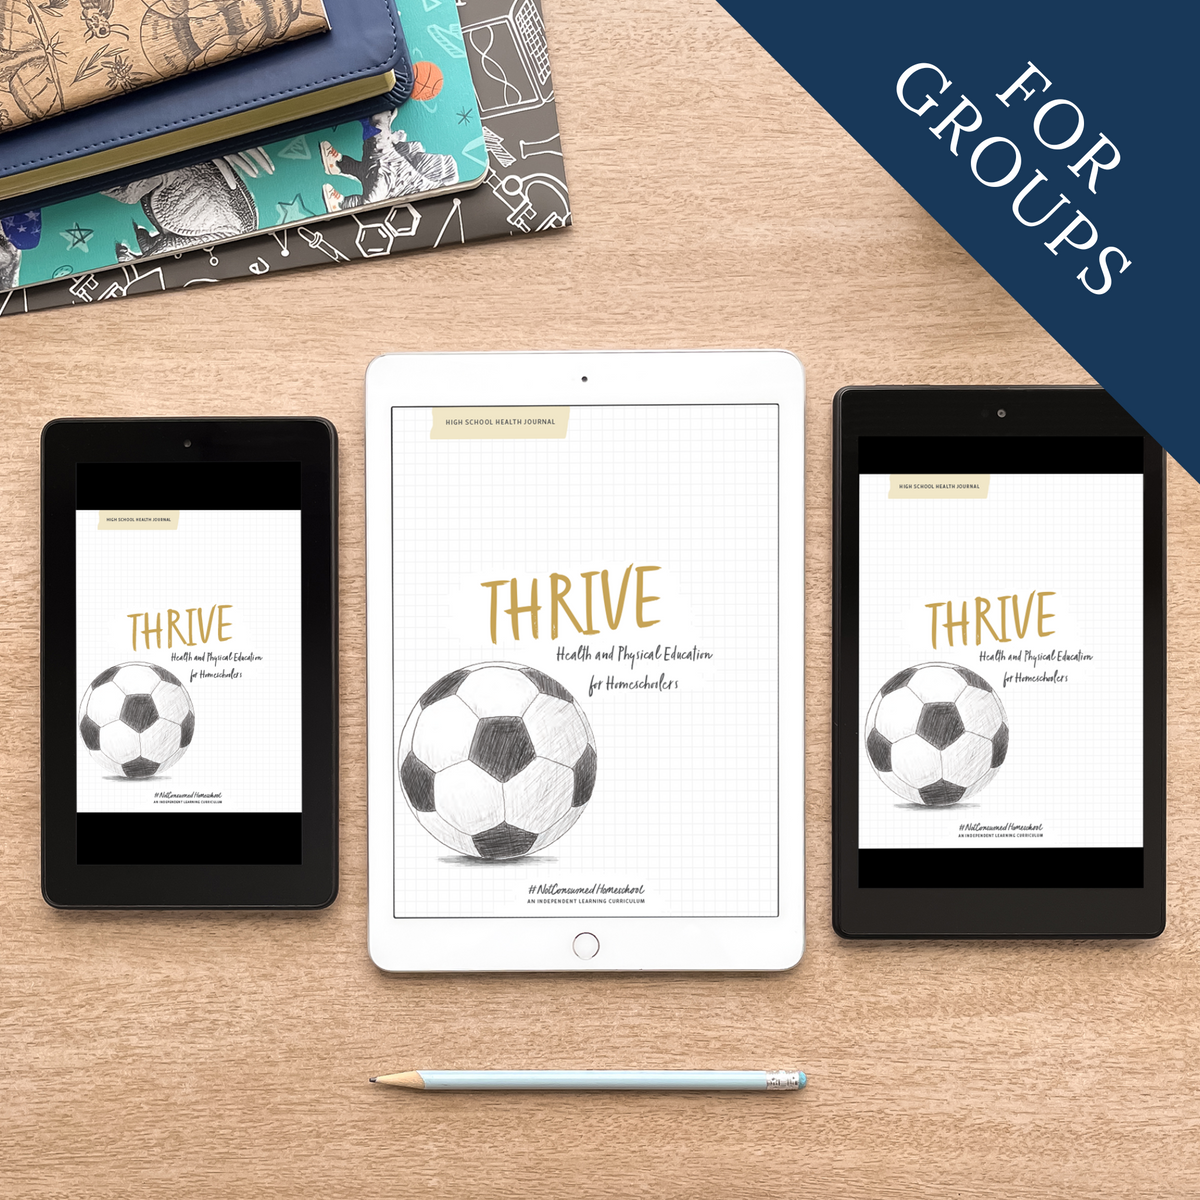 Thrive: Health and Physical Education for Homeschoolers (Digital Site License)